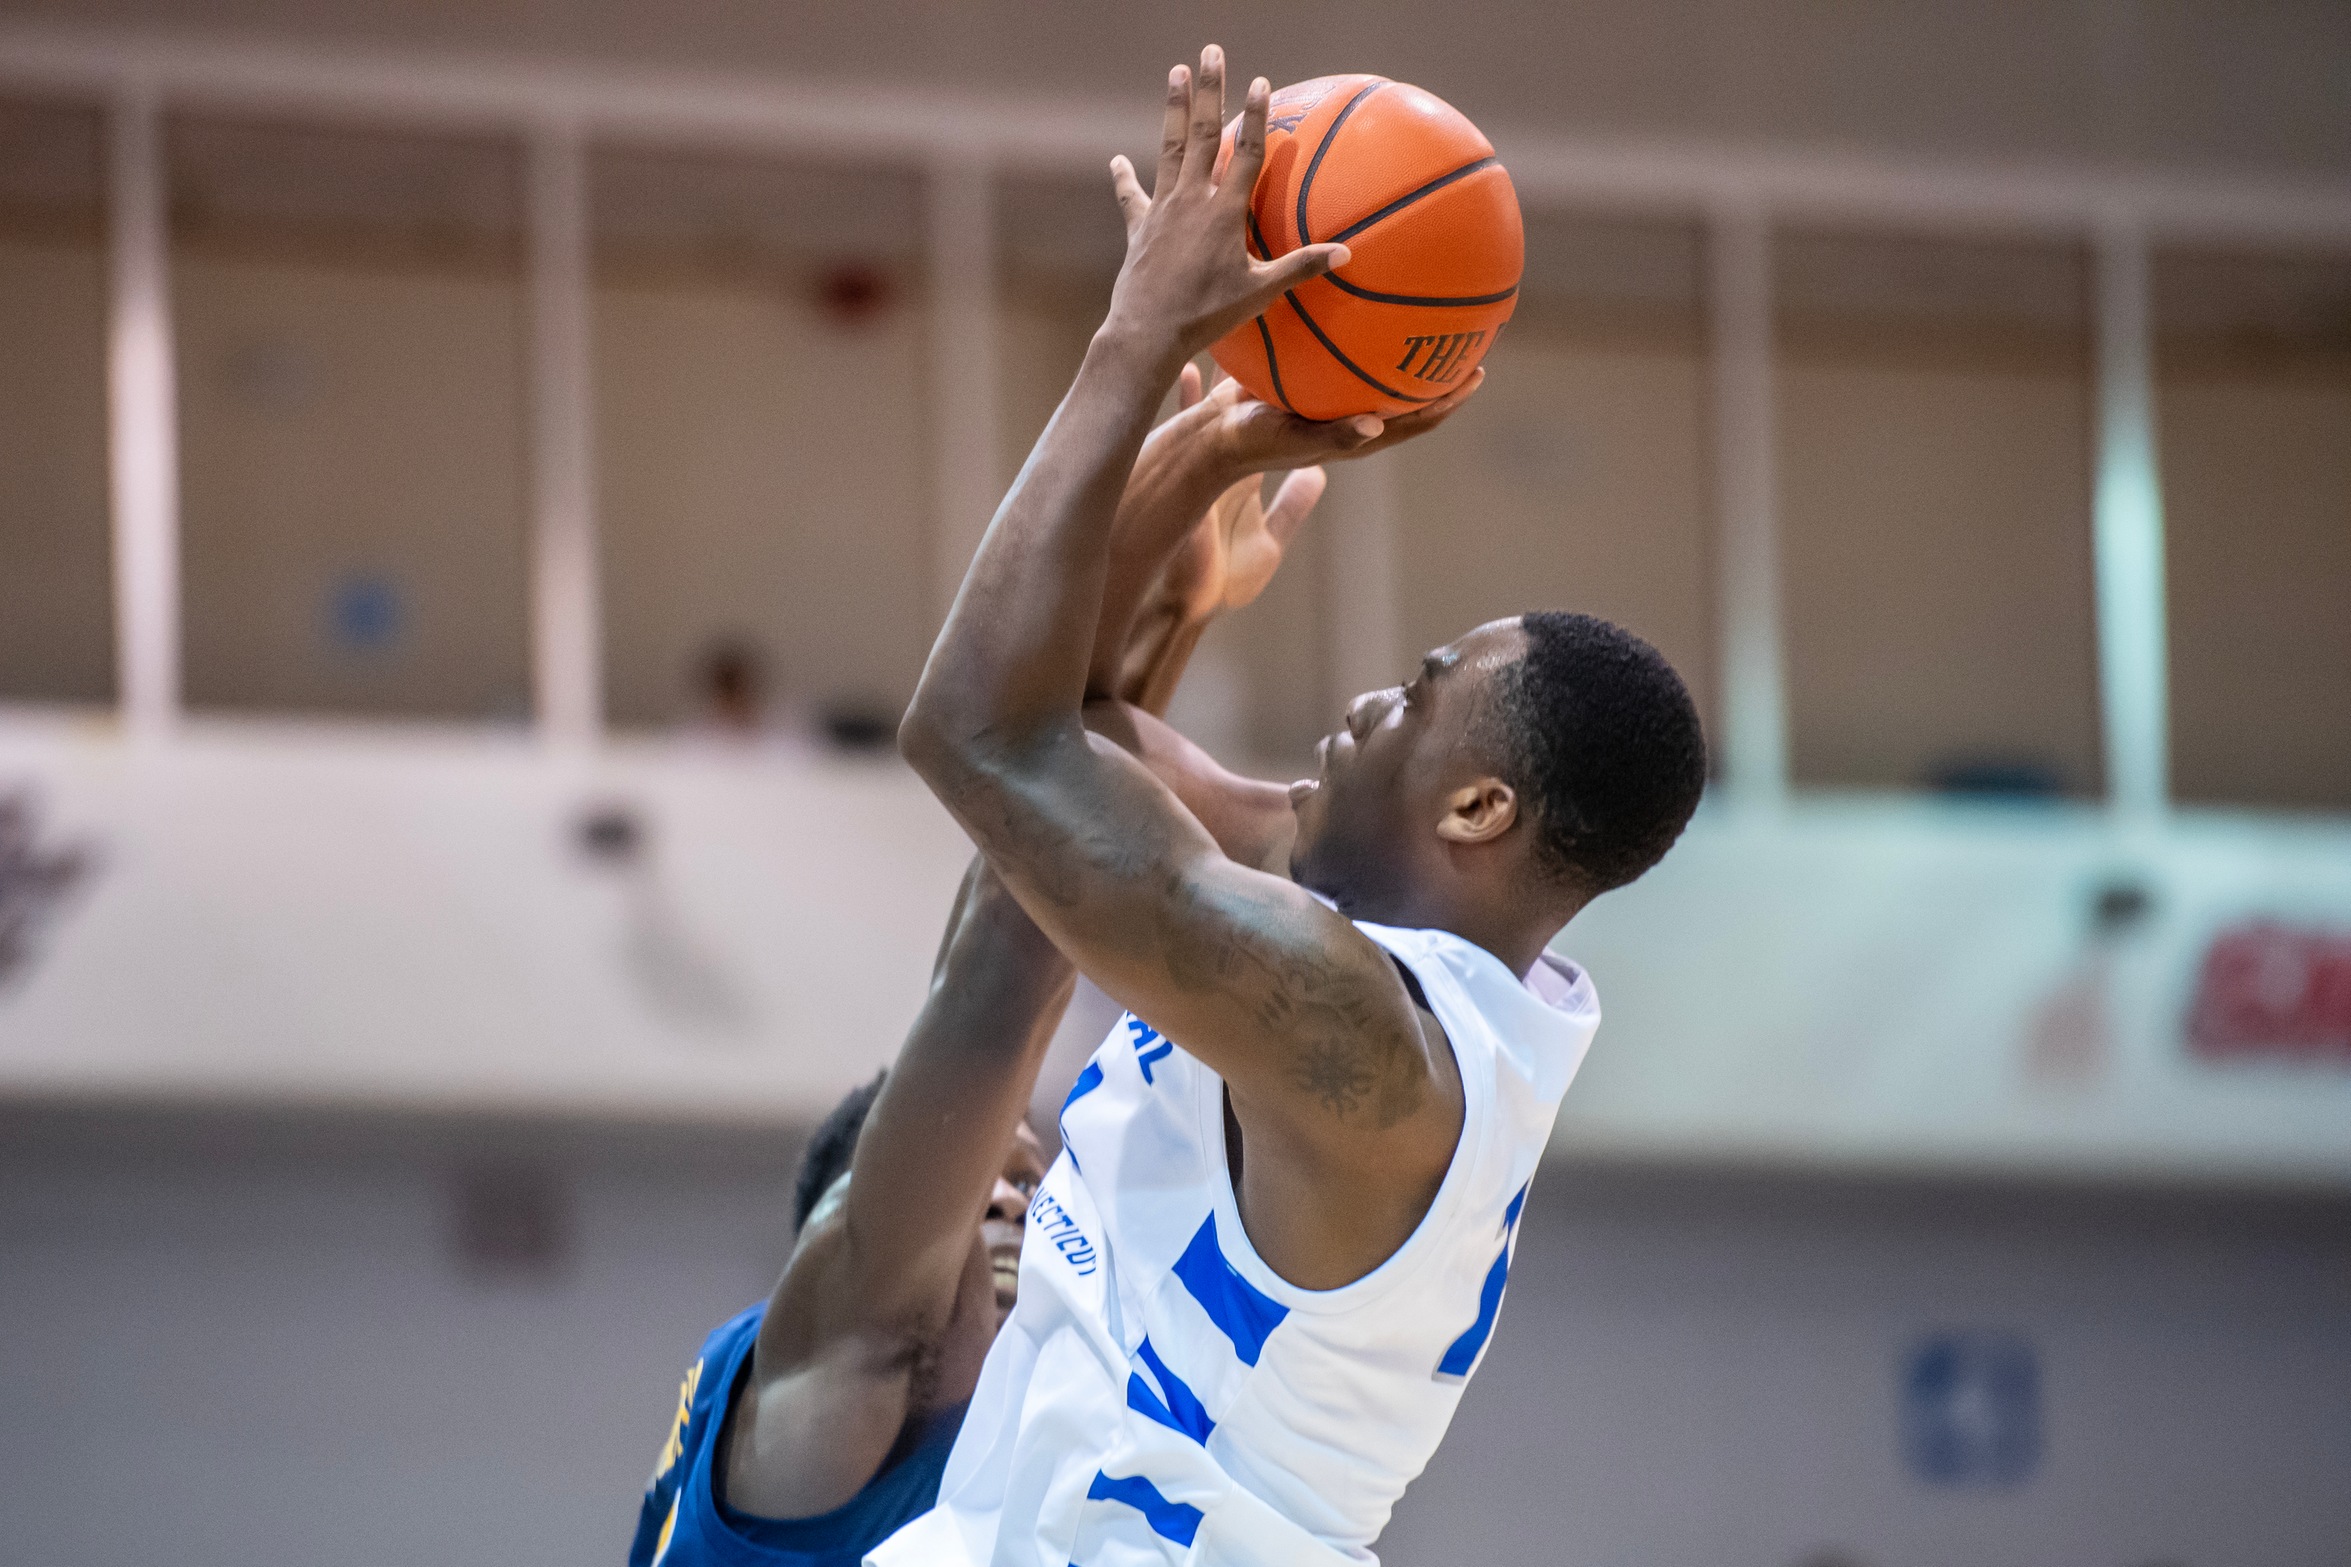 Abdul Momoh scored a career-high and added three blocked shots. (Steve McLaughlin Photography)